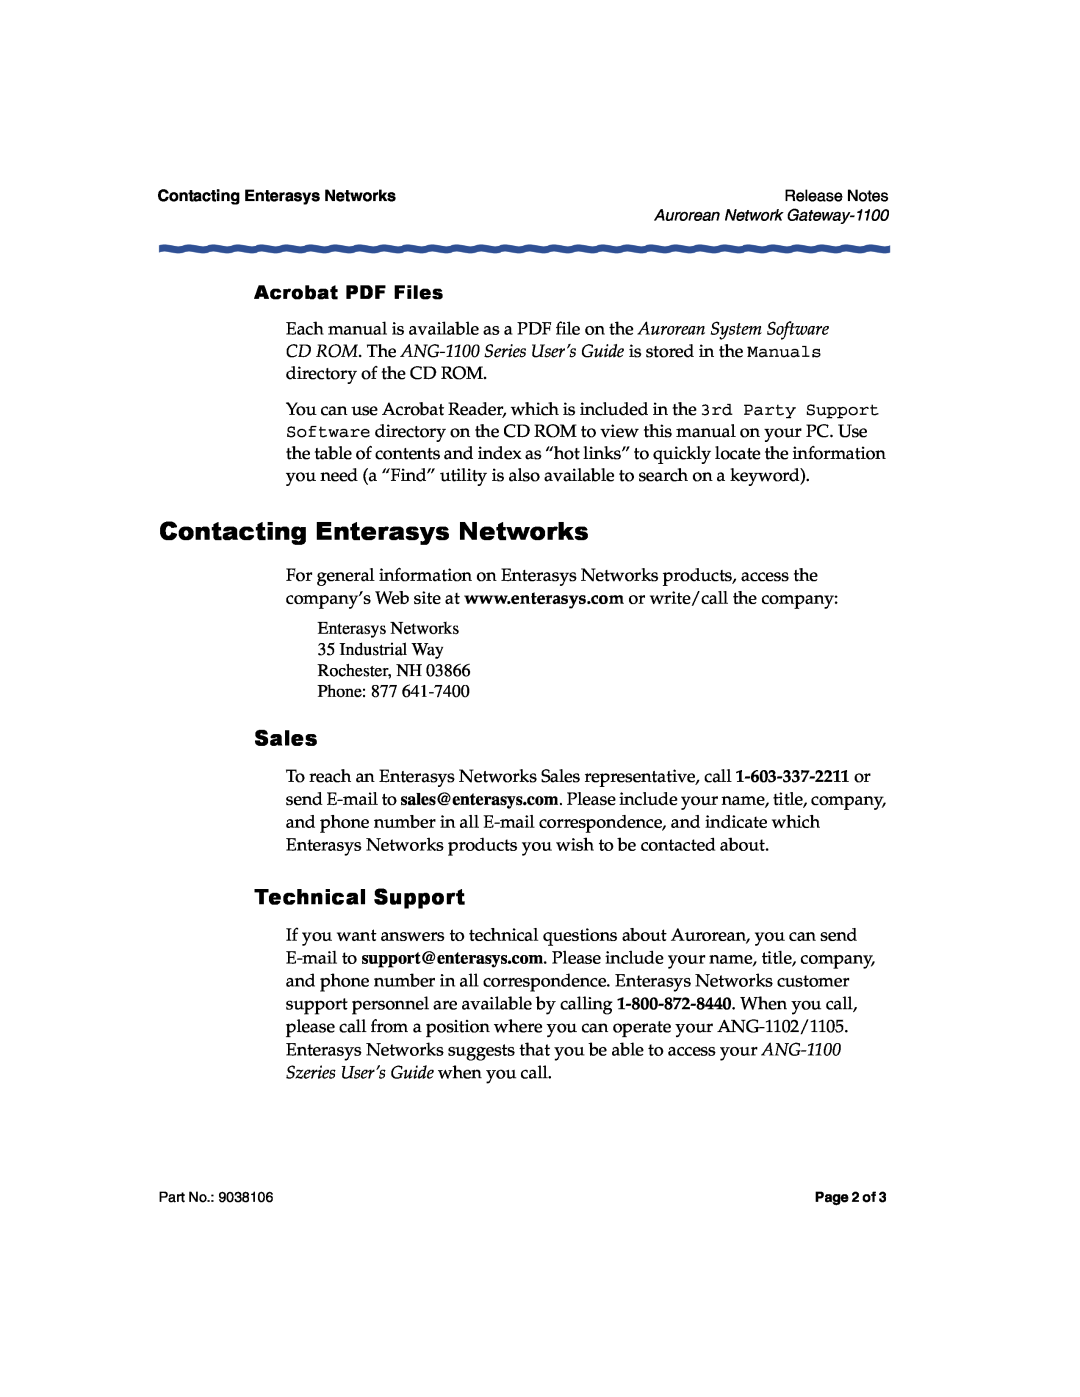 Enterasys Networks 1100 Series manual Contacting Enterasys Networks, Acrobat PDF Files, Sales, Technical Support 